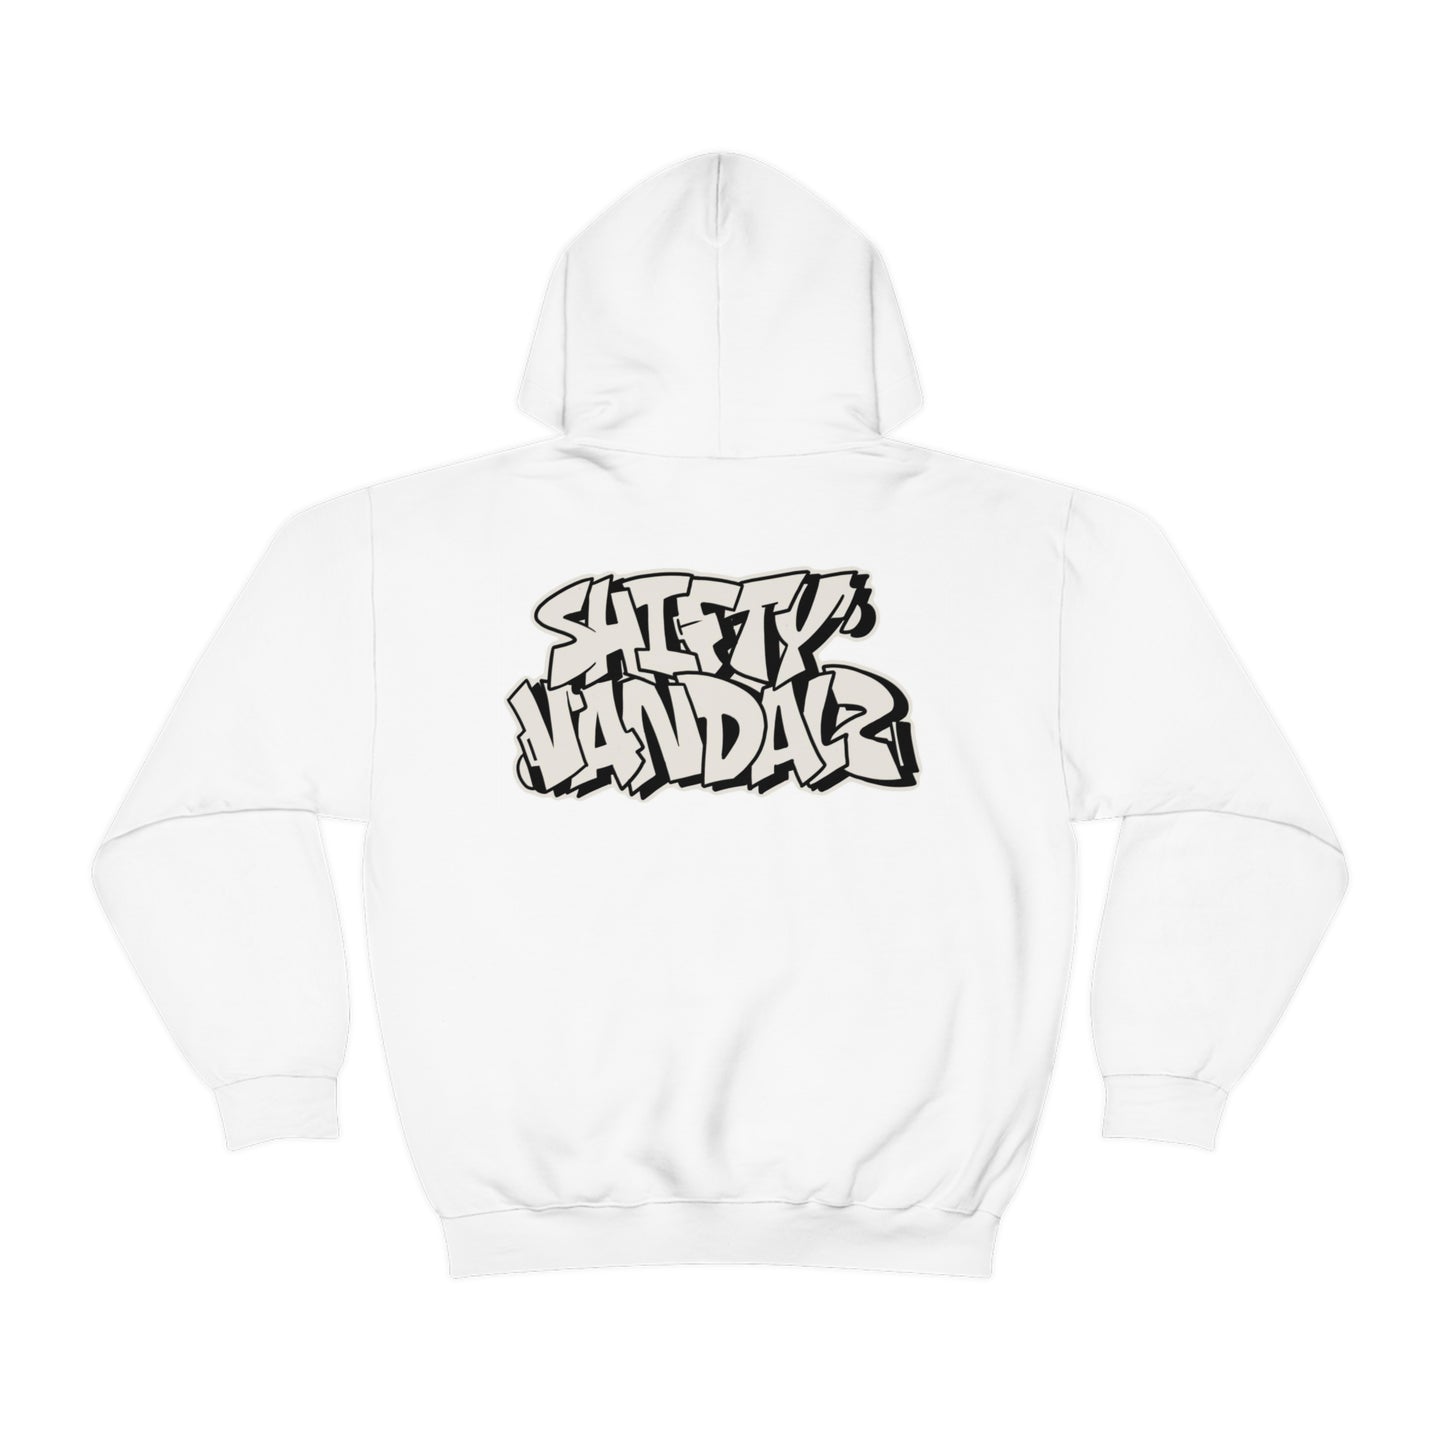 Official Shifty vandalz hoody(Images switched)